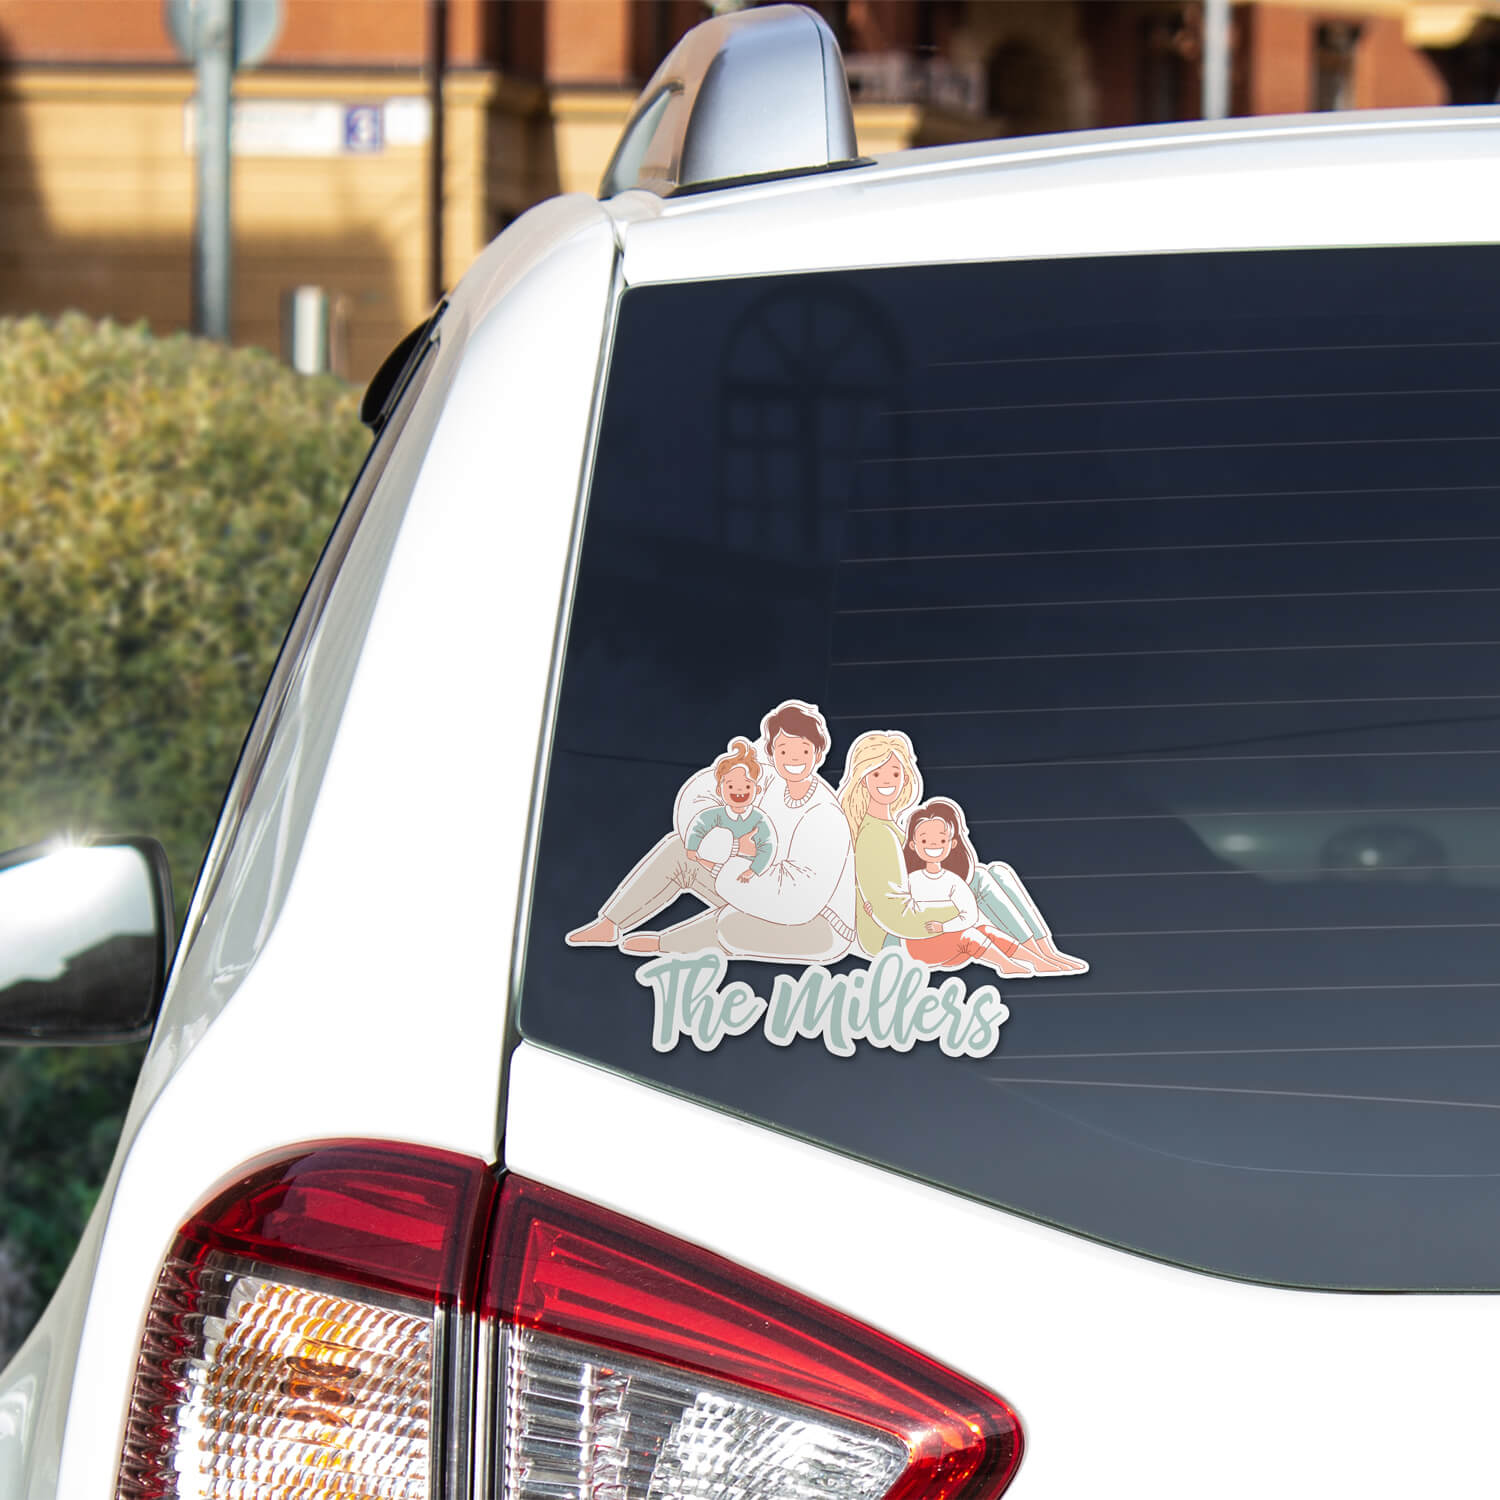 personalized window decal of a family and their name